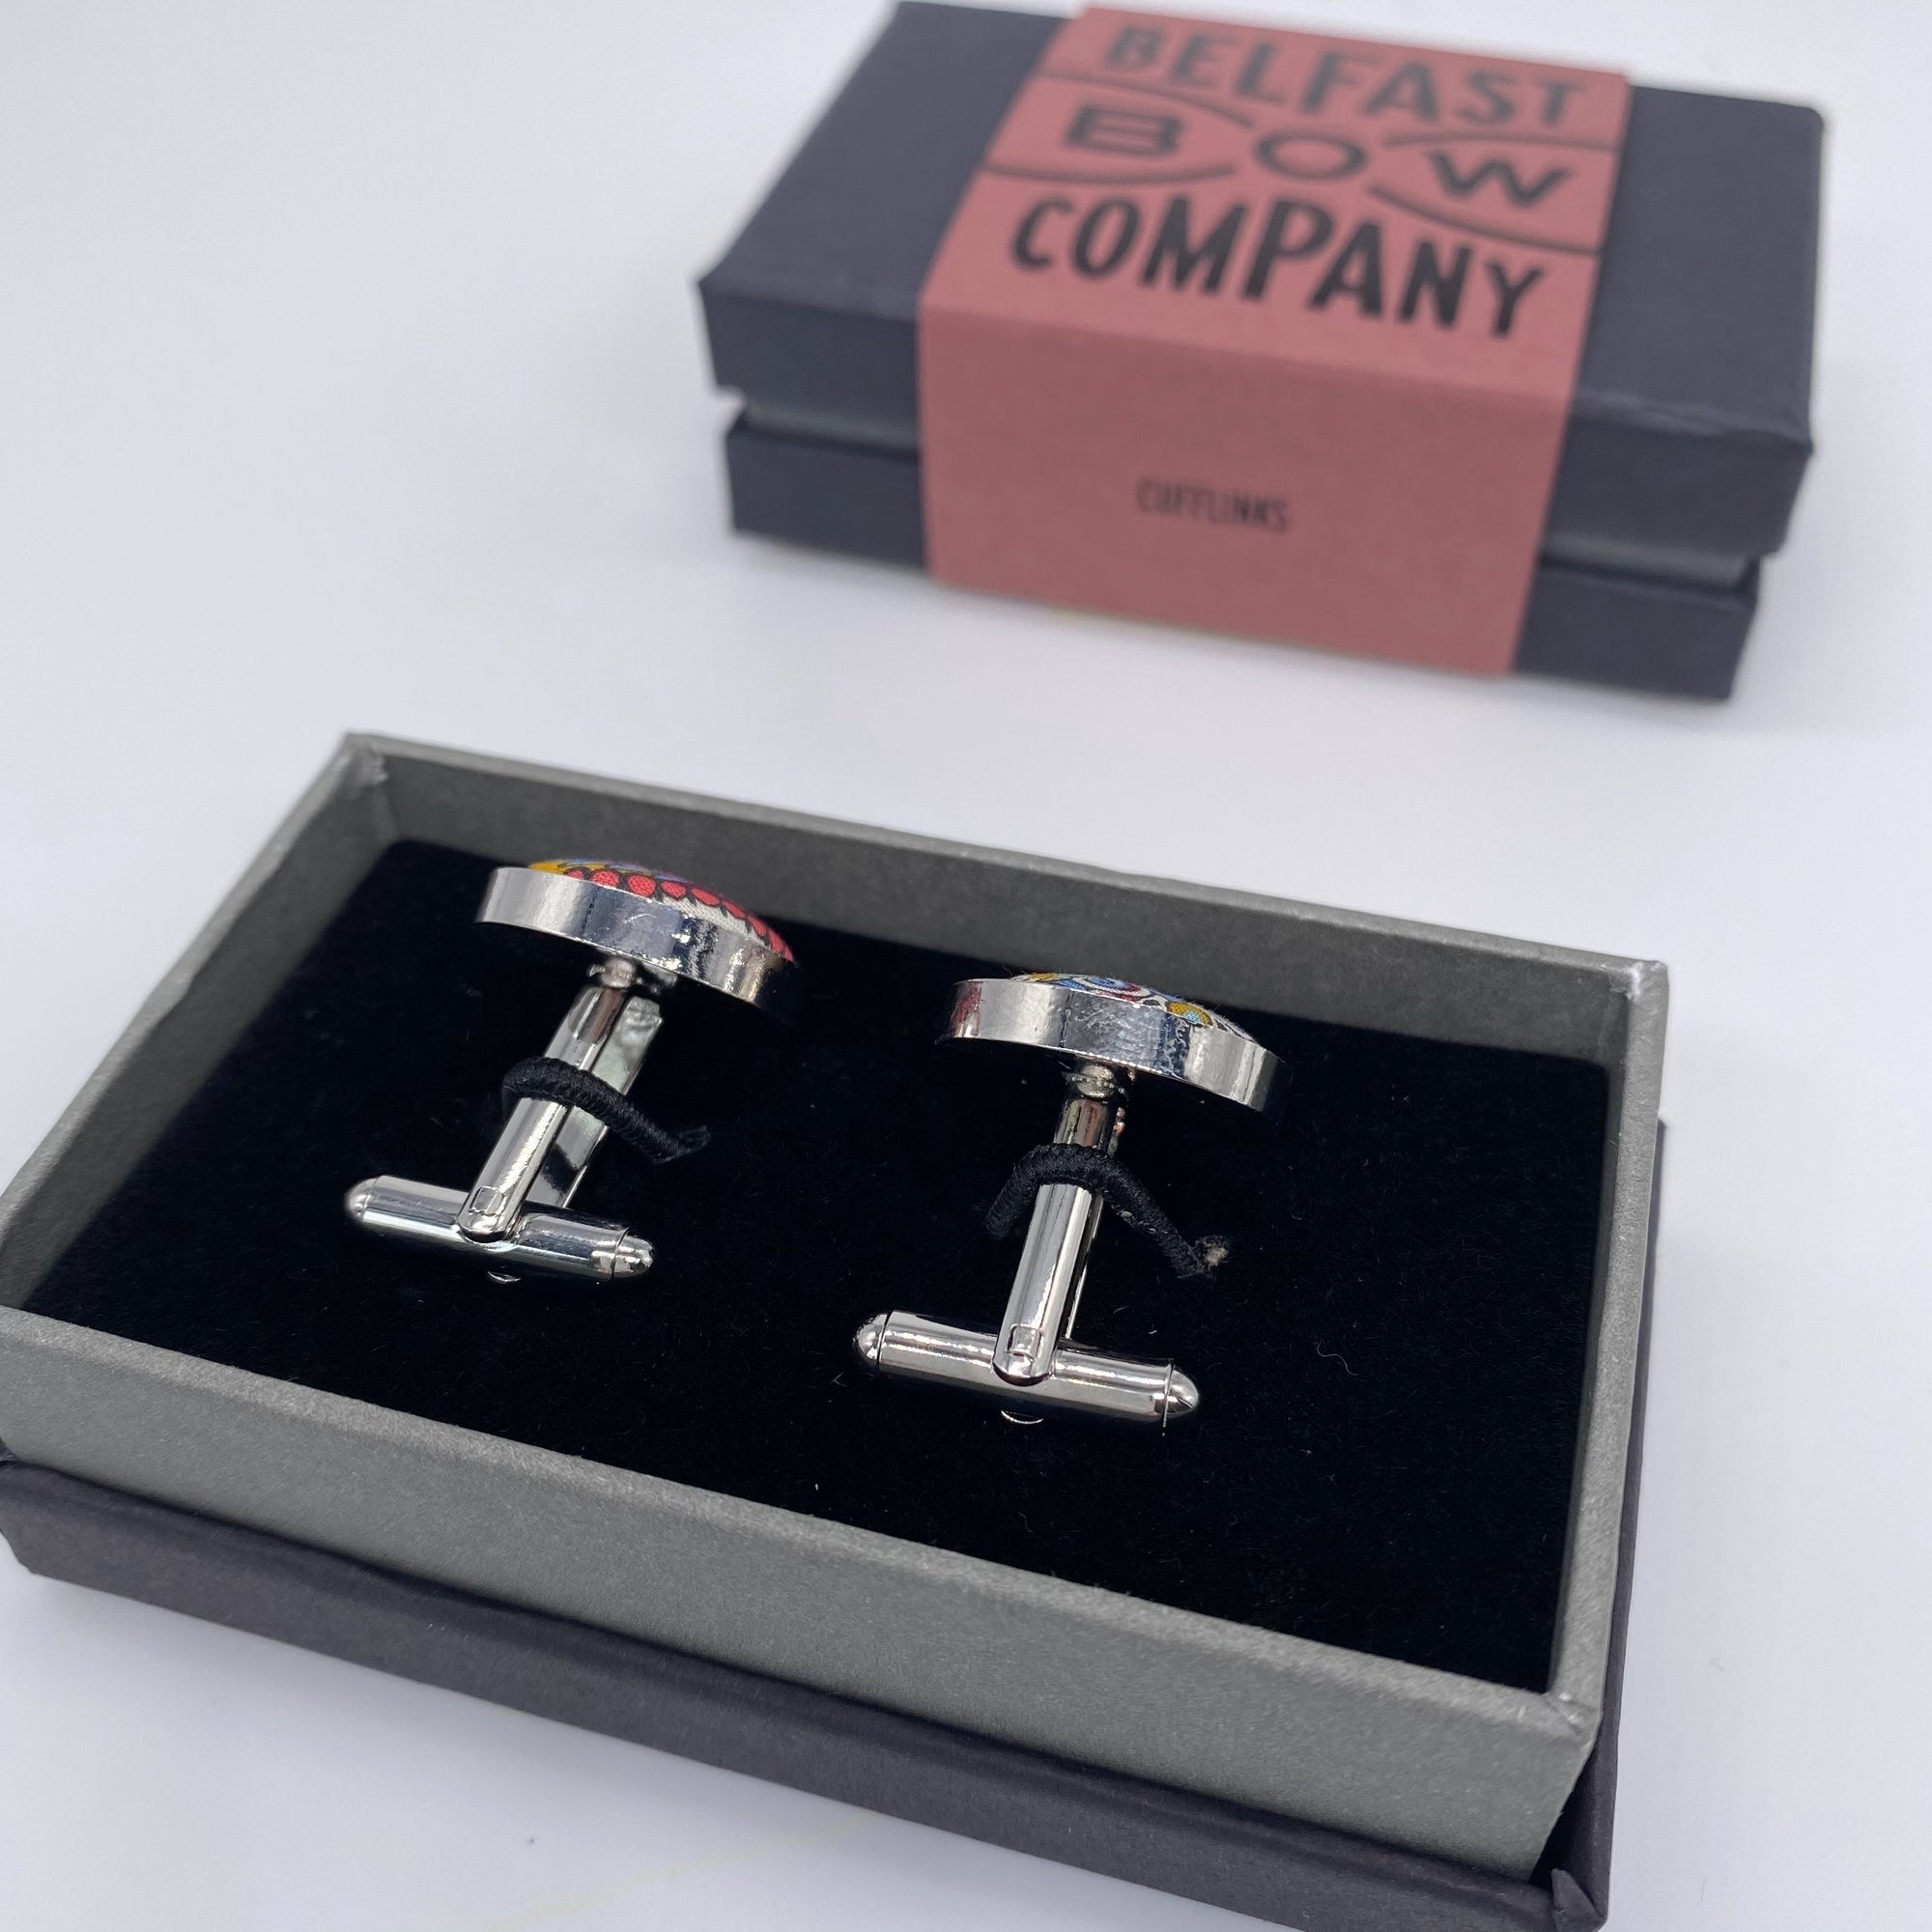 Liberty of London Cufflinks in Burgundy Paisley by the Belfast Bow Company